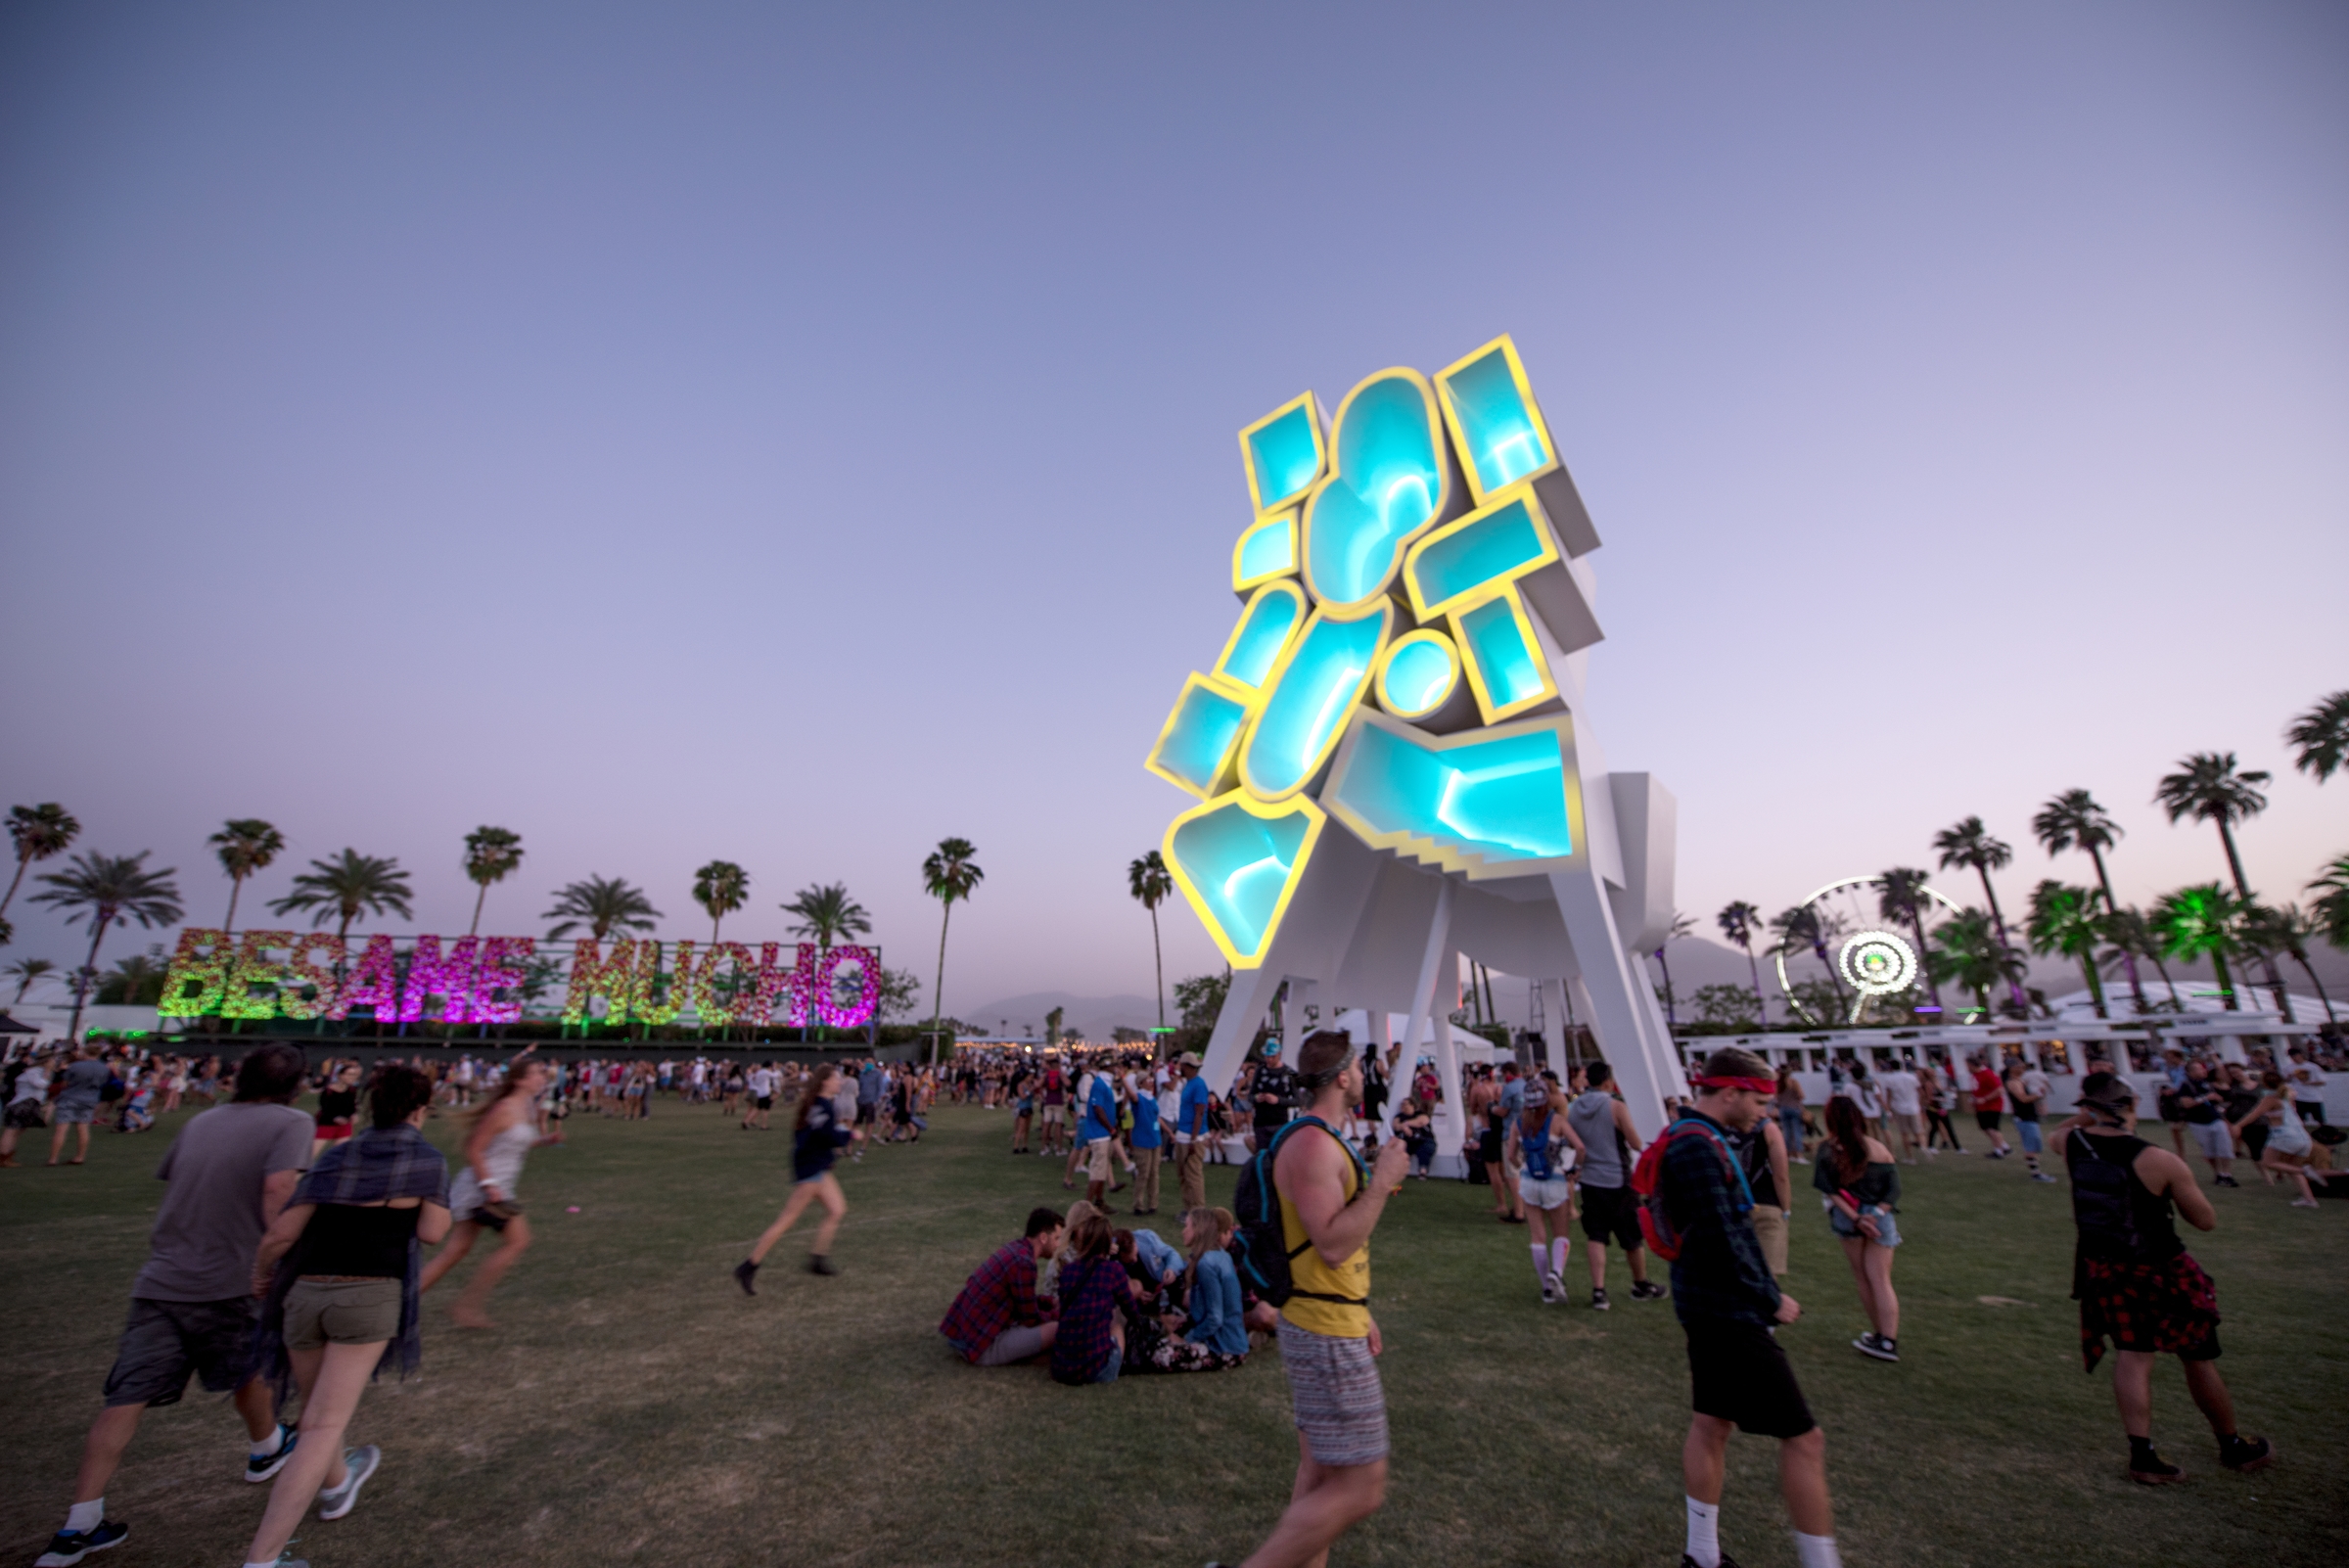 Art and architecture highlights from Coachella - Archpaper.com